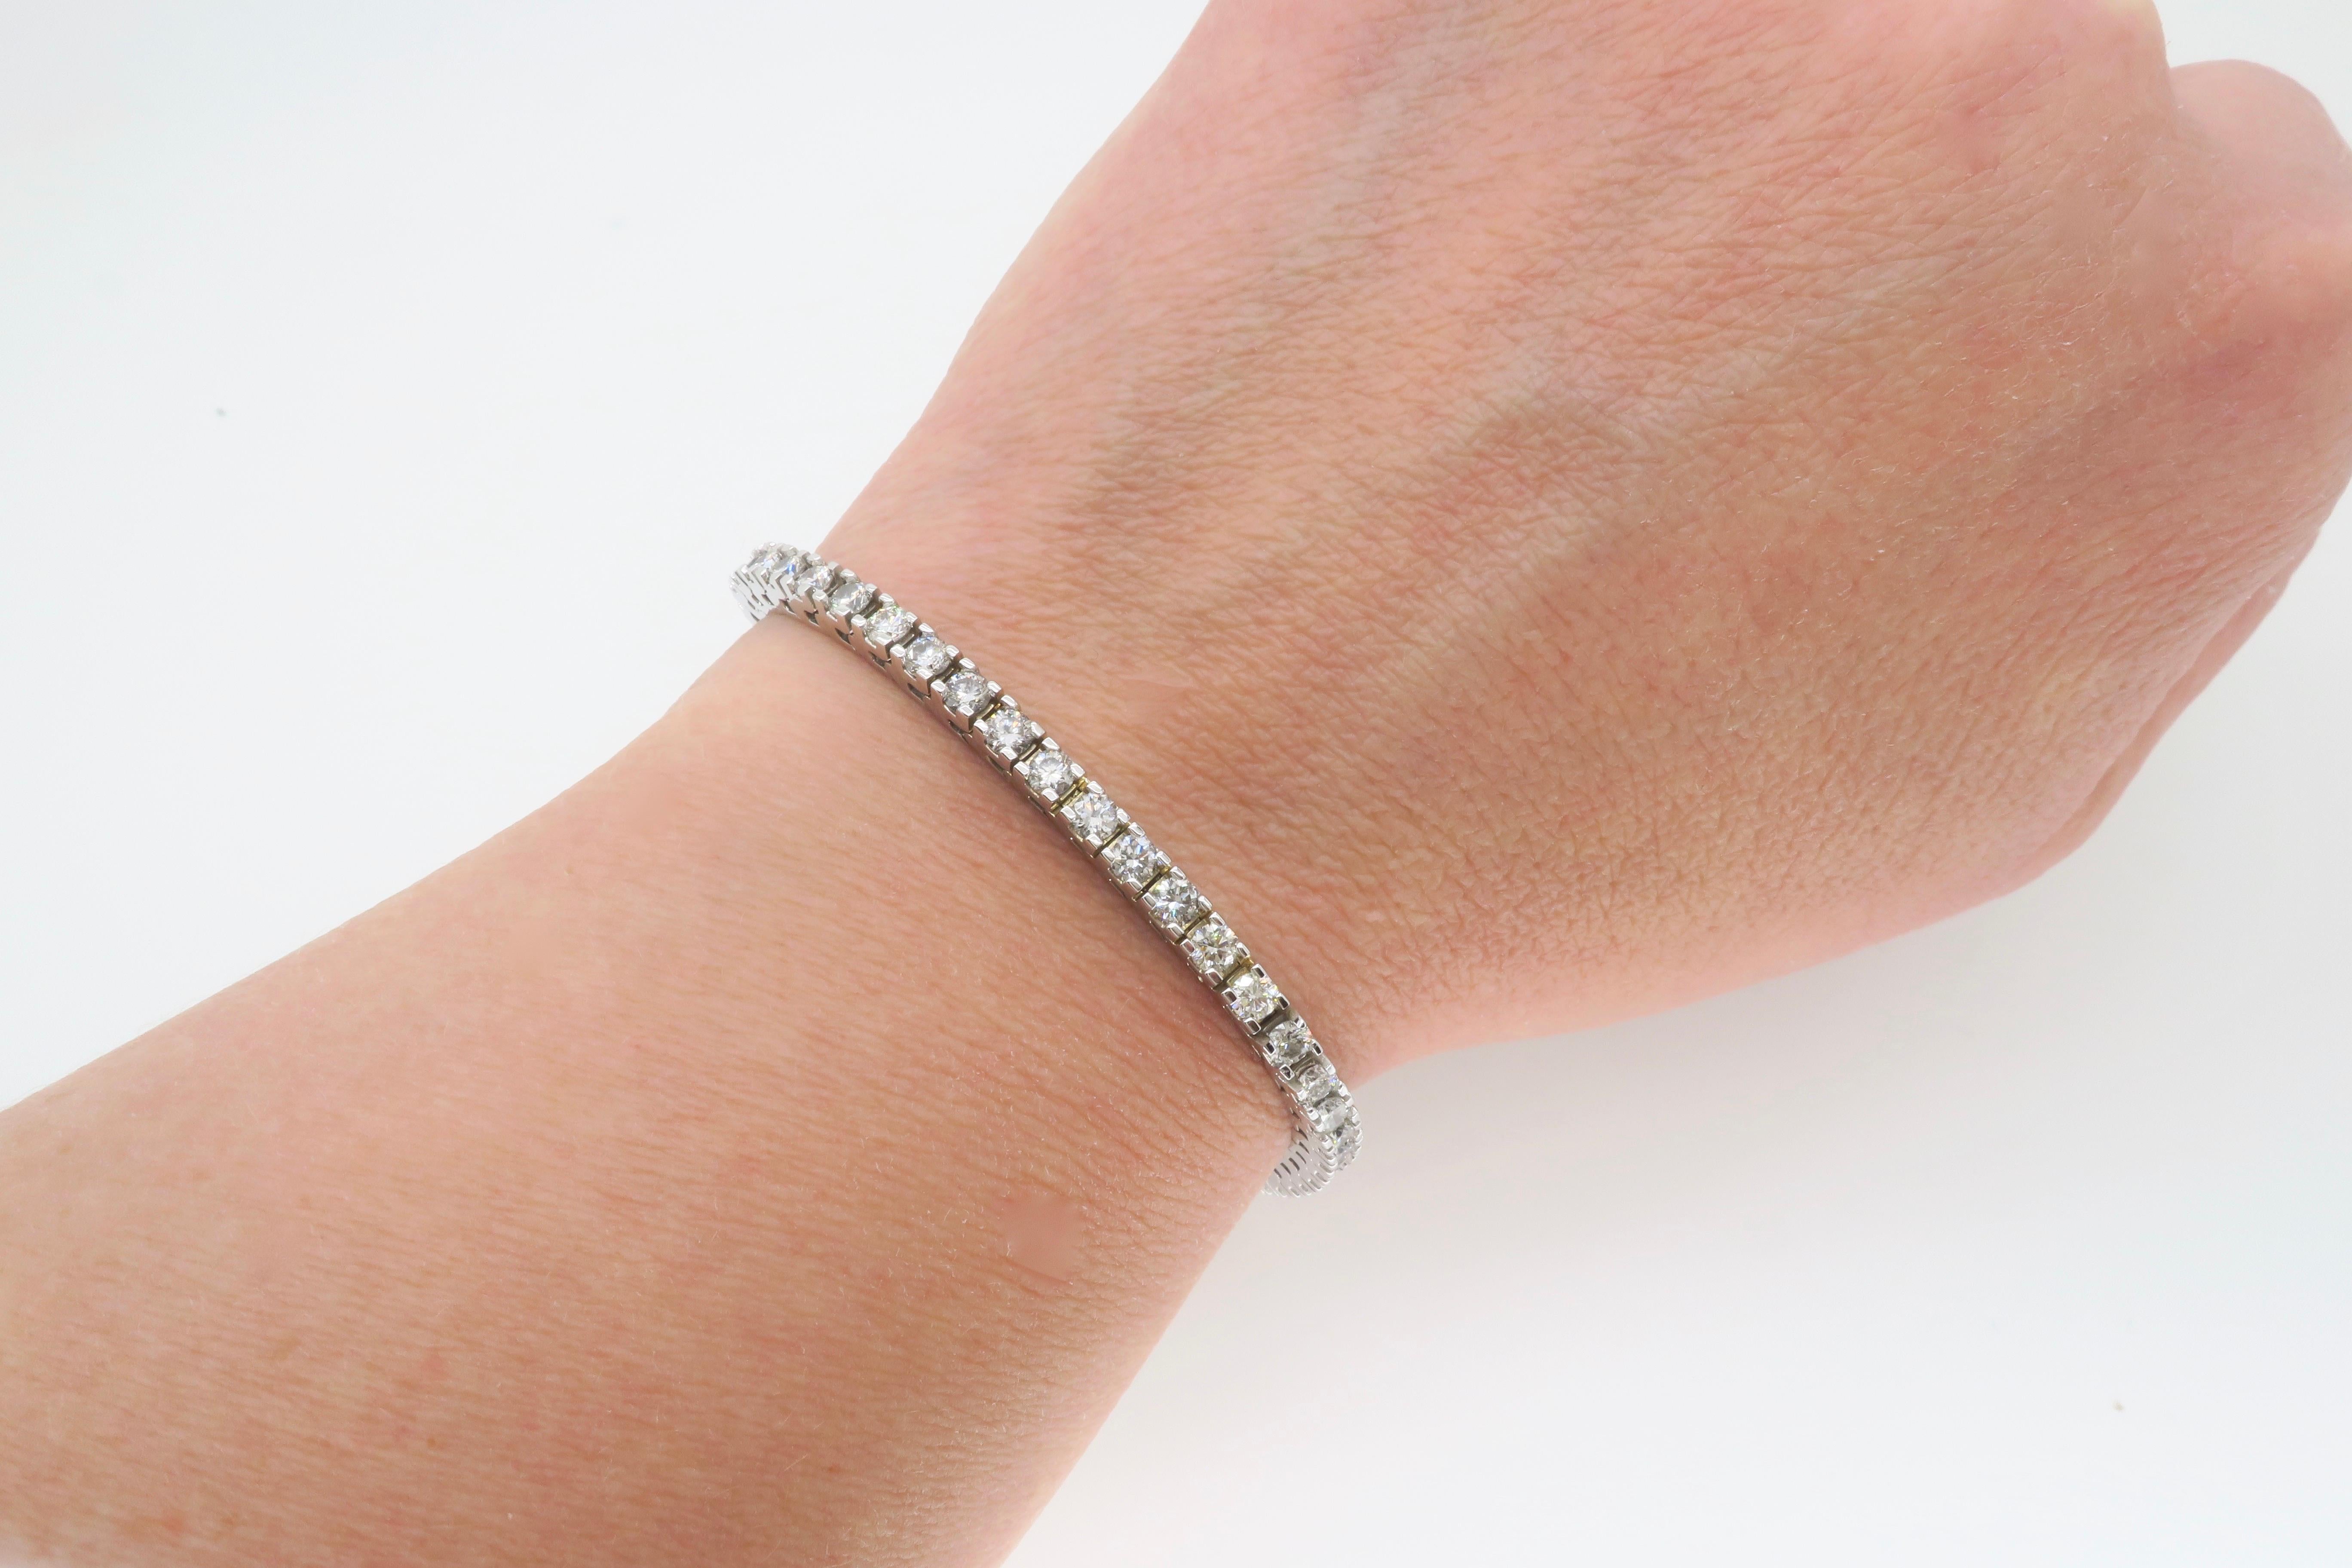 Classic diamond tennis bracelet made in 14k white gold with 5.02ctw of diamonds. 

Diamond Carat Weight: Approximately 5.02CTW
Diamond Cut: Round Brilliant Cut     
Color: Average: H-J
Clarity: Average: VS-SI
Metal: 14K White Gold
Marked/Tested: